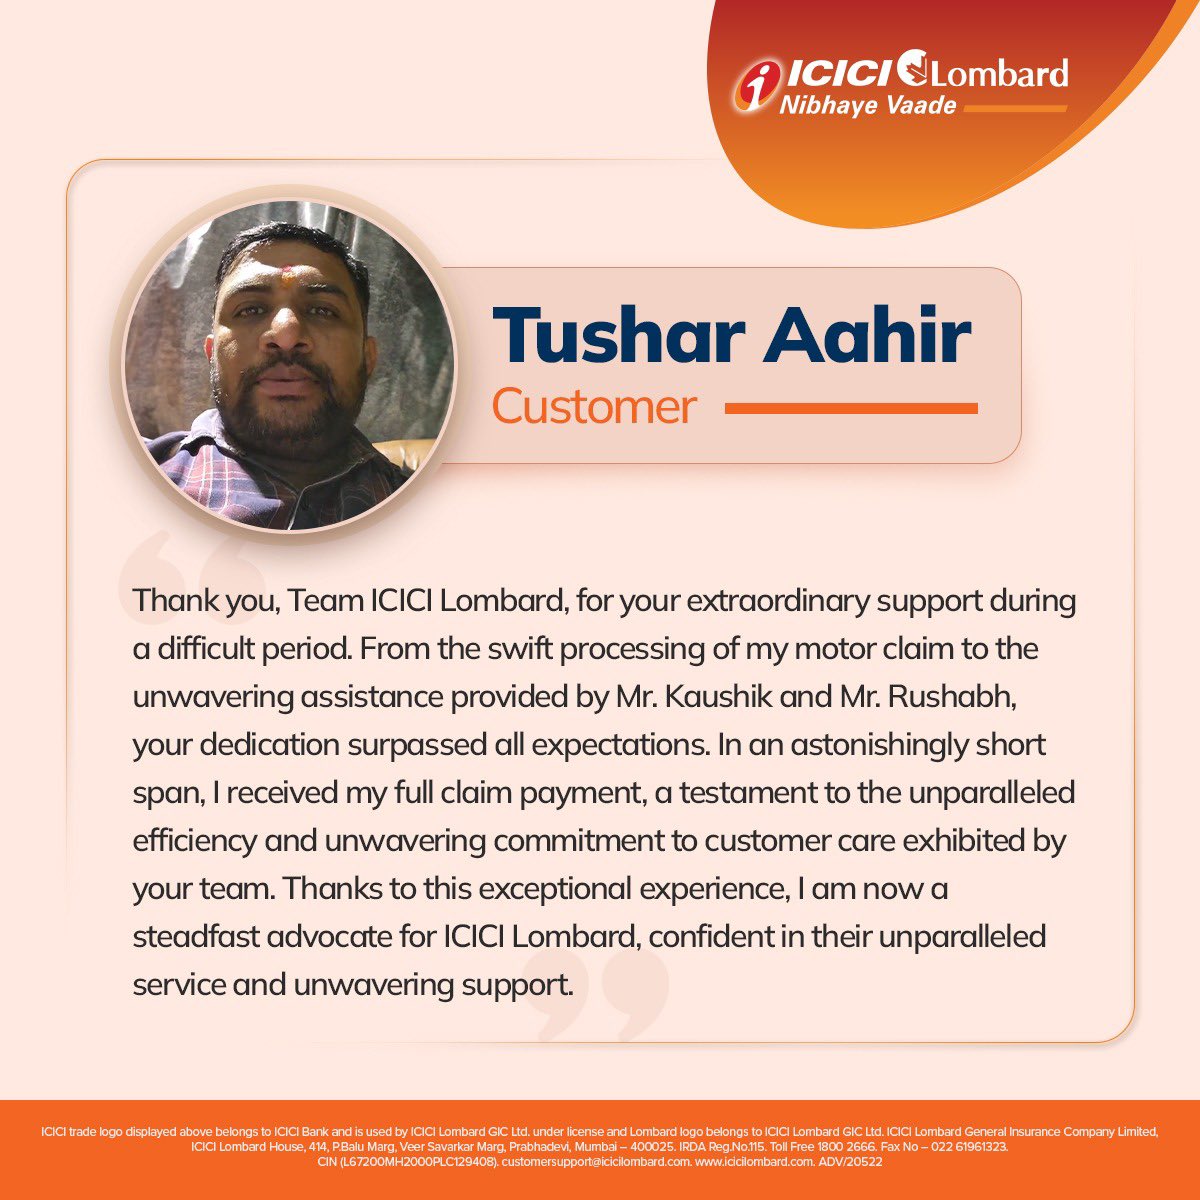 From swift claims processing to unwavering support, we're proud to be there for our customers every step of the way. #NibhayeVaade #ICICILombard #Testimonial #CustomerSpotlight